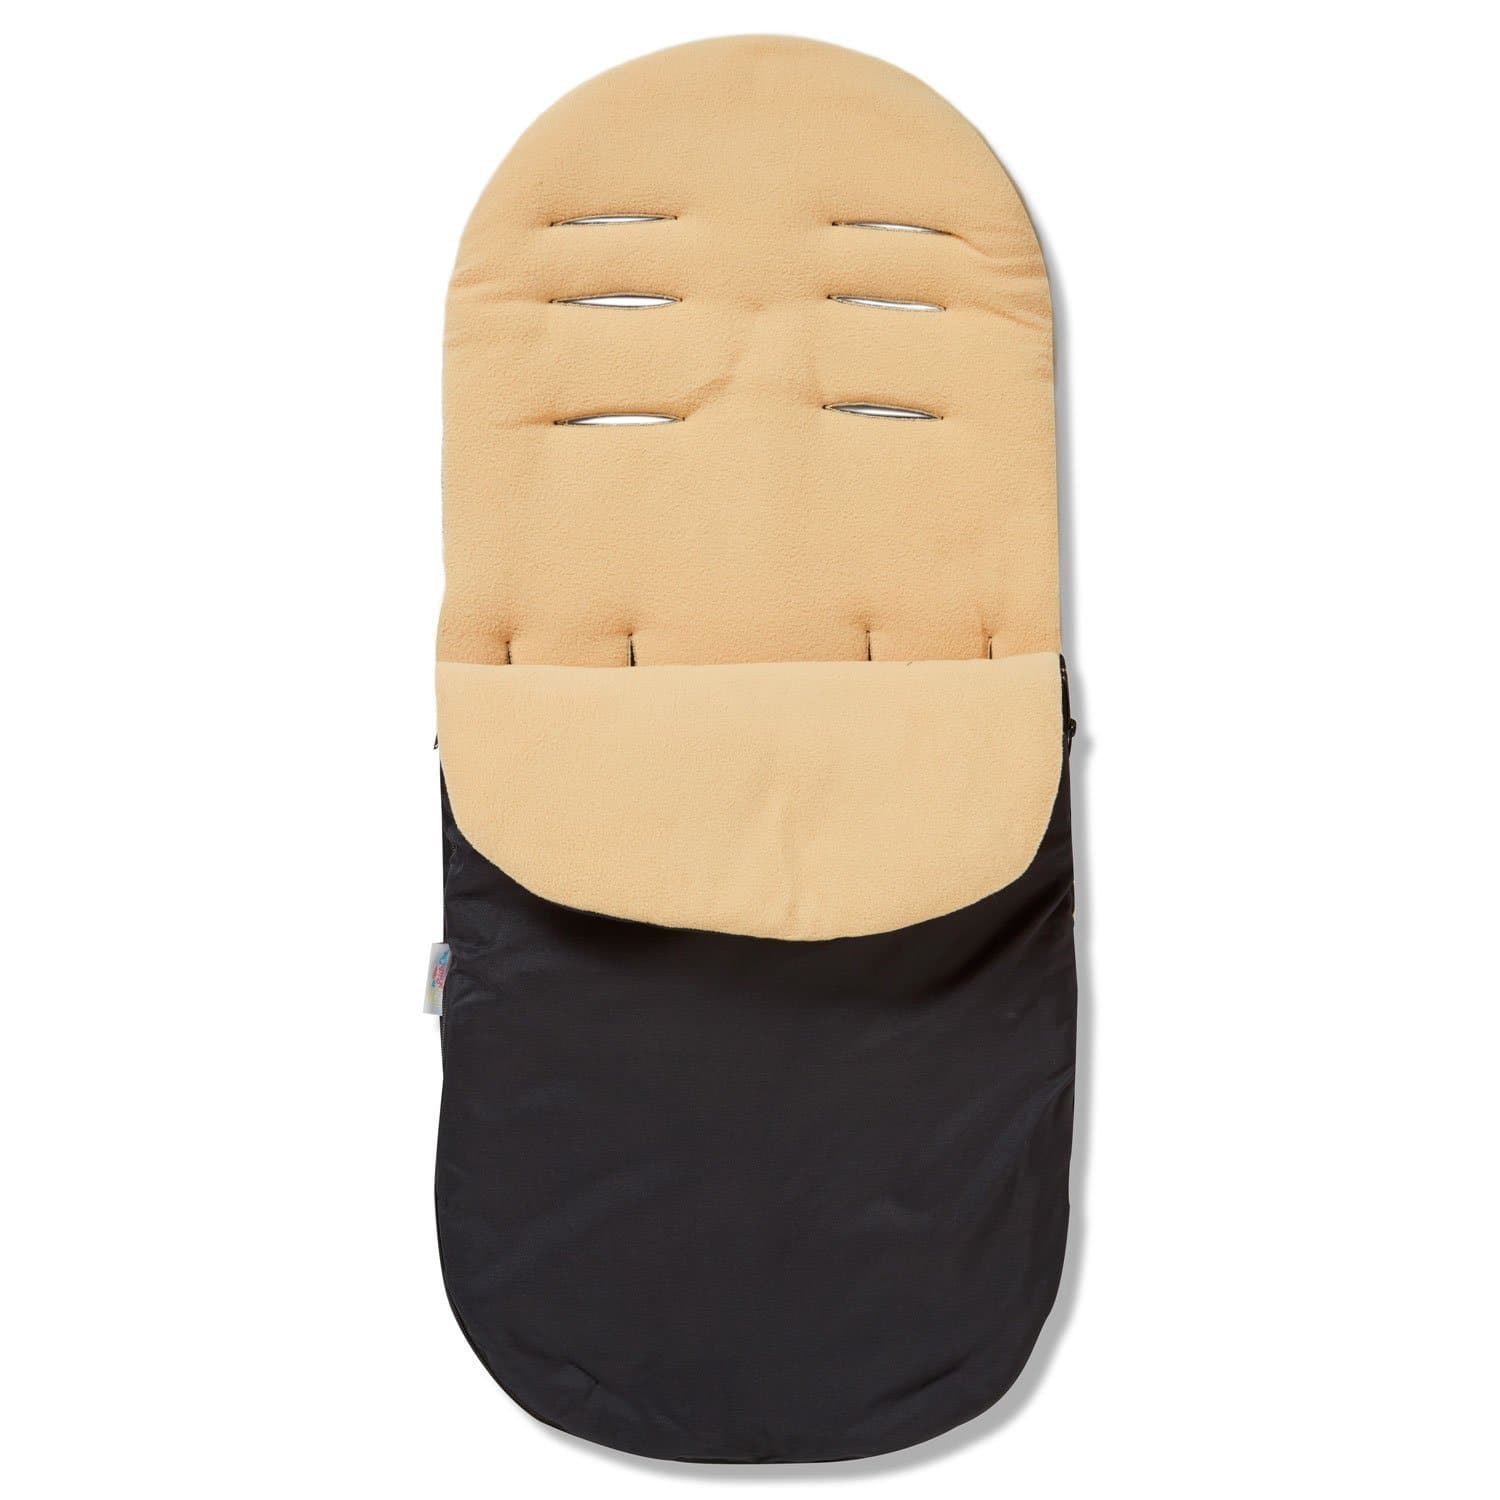 Footmuff / Cosy Toes Compatible with Esprit - Sand / Fits All Models | For Your Little One